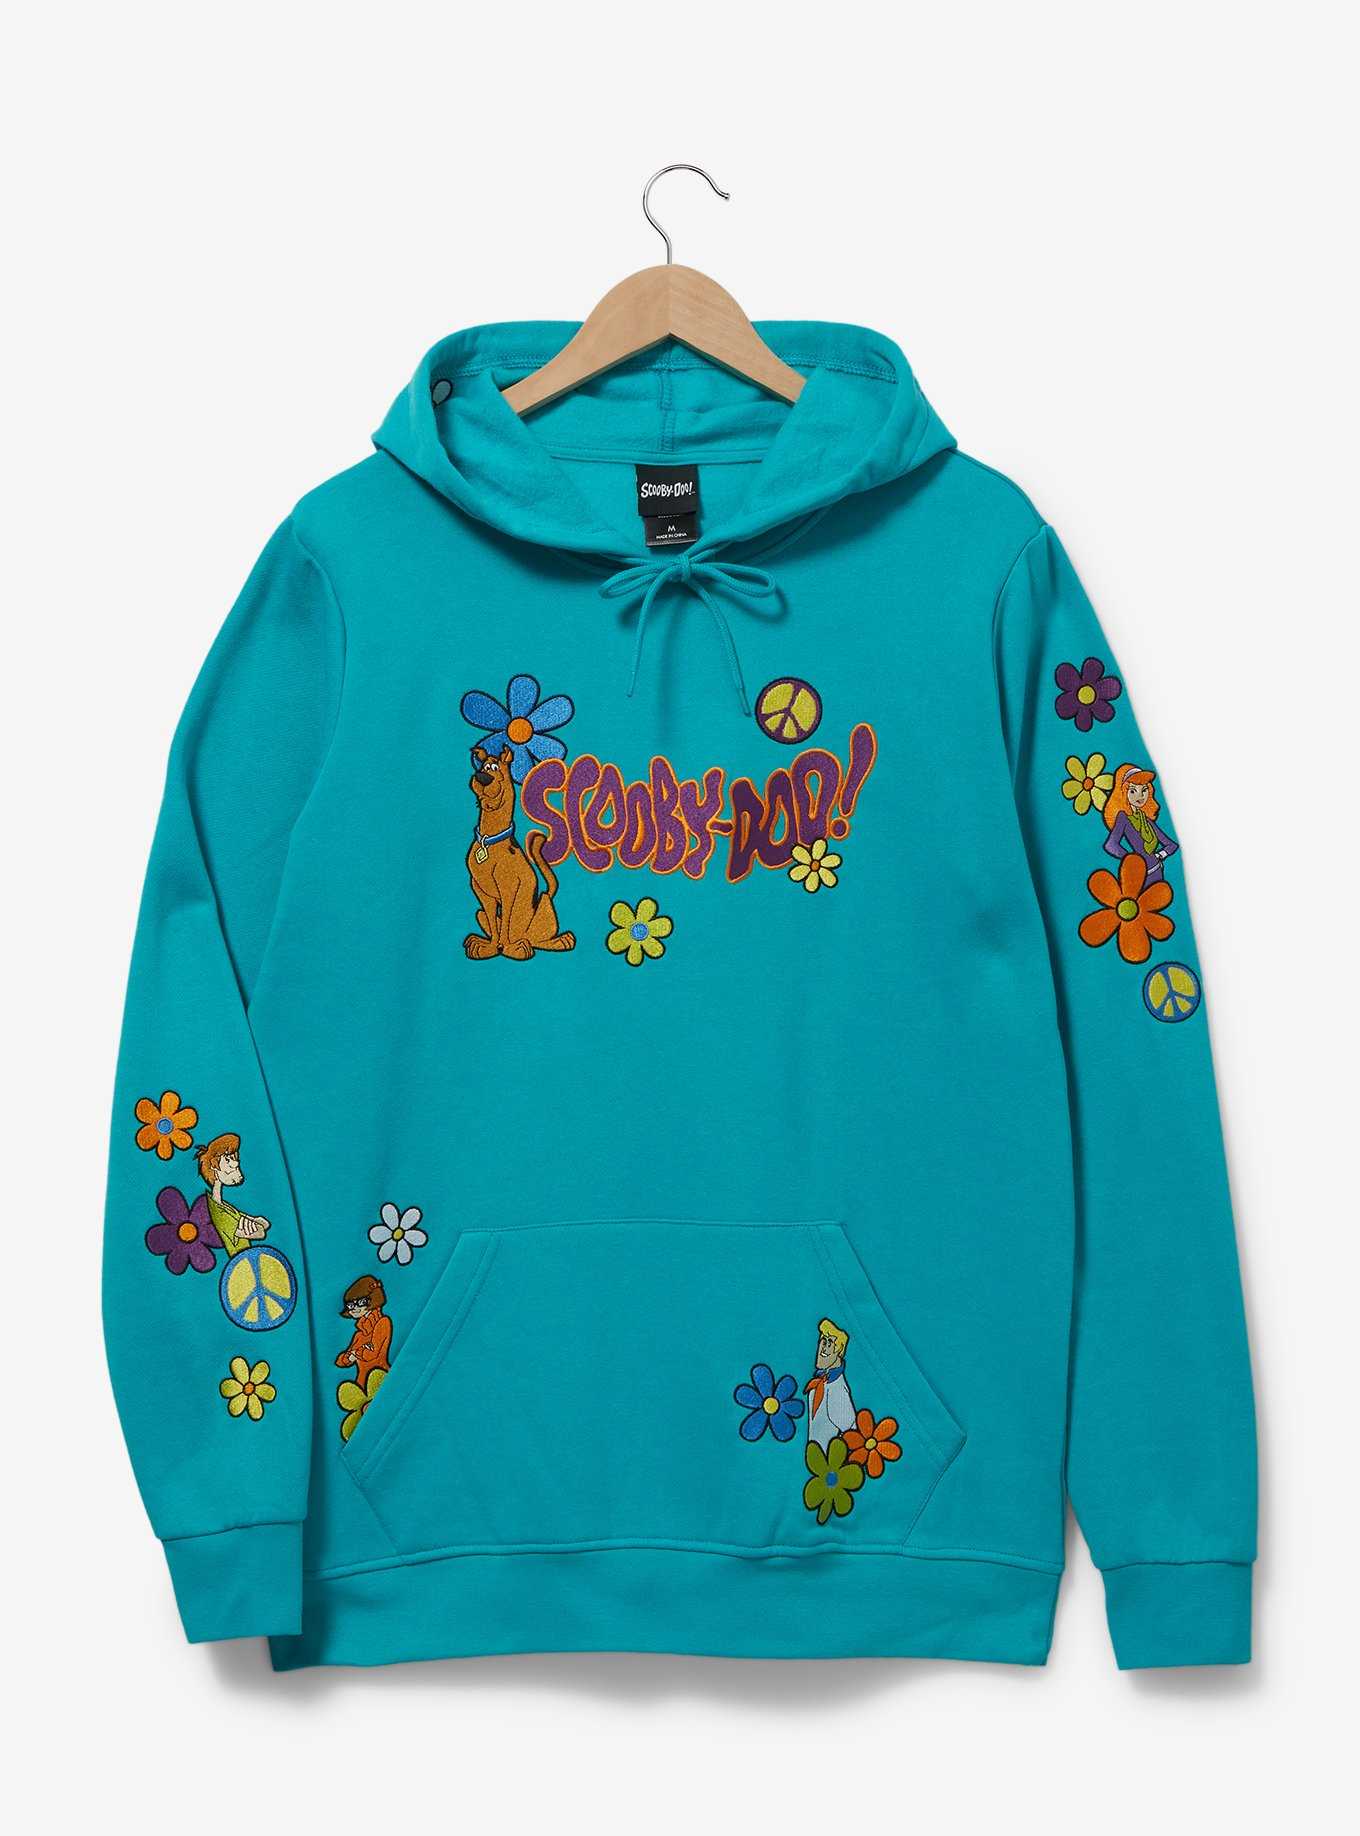 & | Sweaters Hoodies BoxLunch Scooby-Doo Gifts OFFICIAL